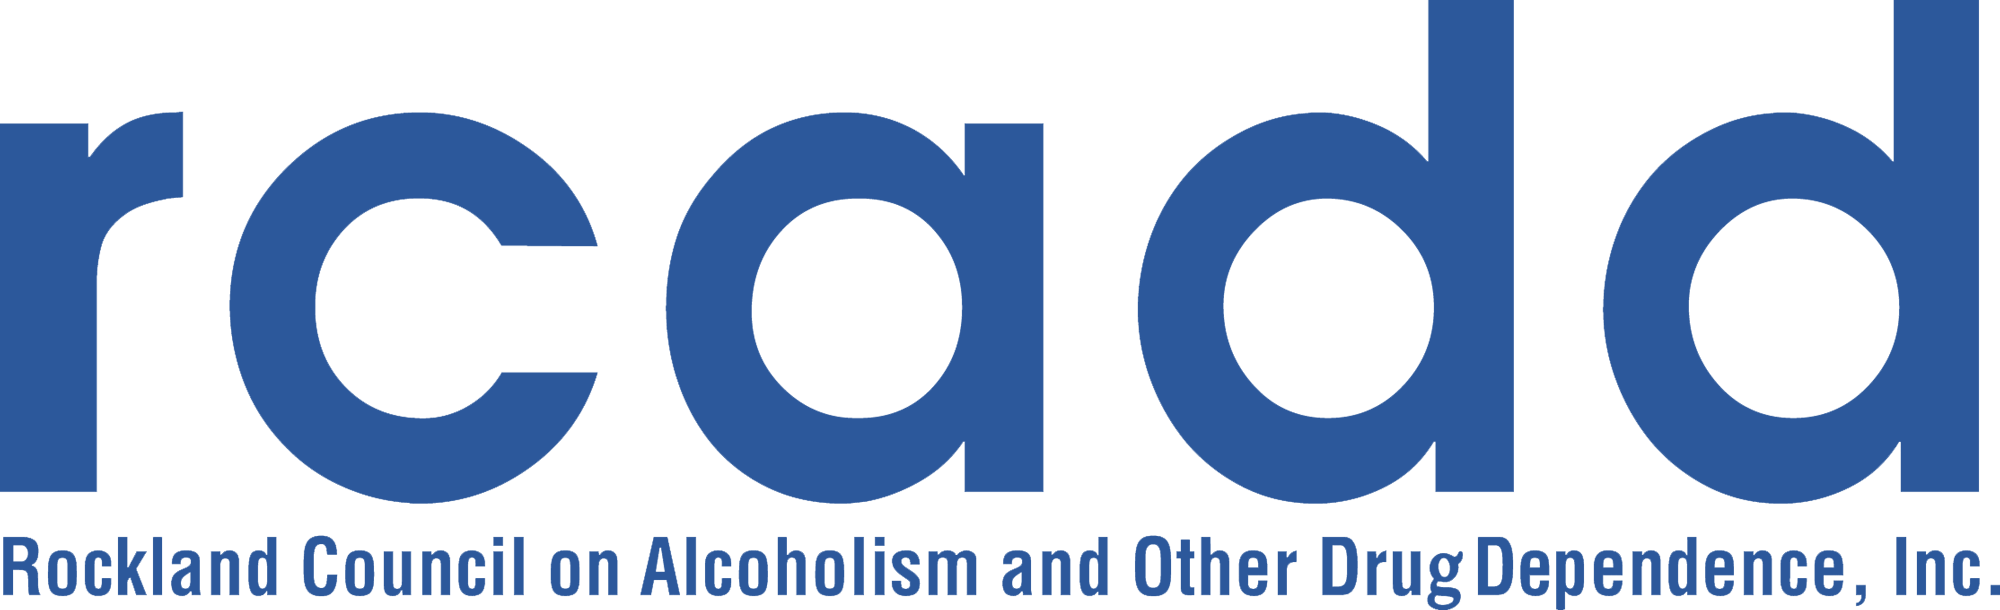 Rockland Council on Alcoholism and Other Drug Dependence, Inc.